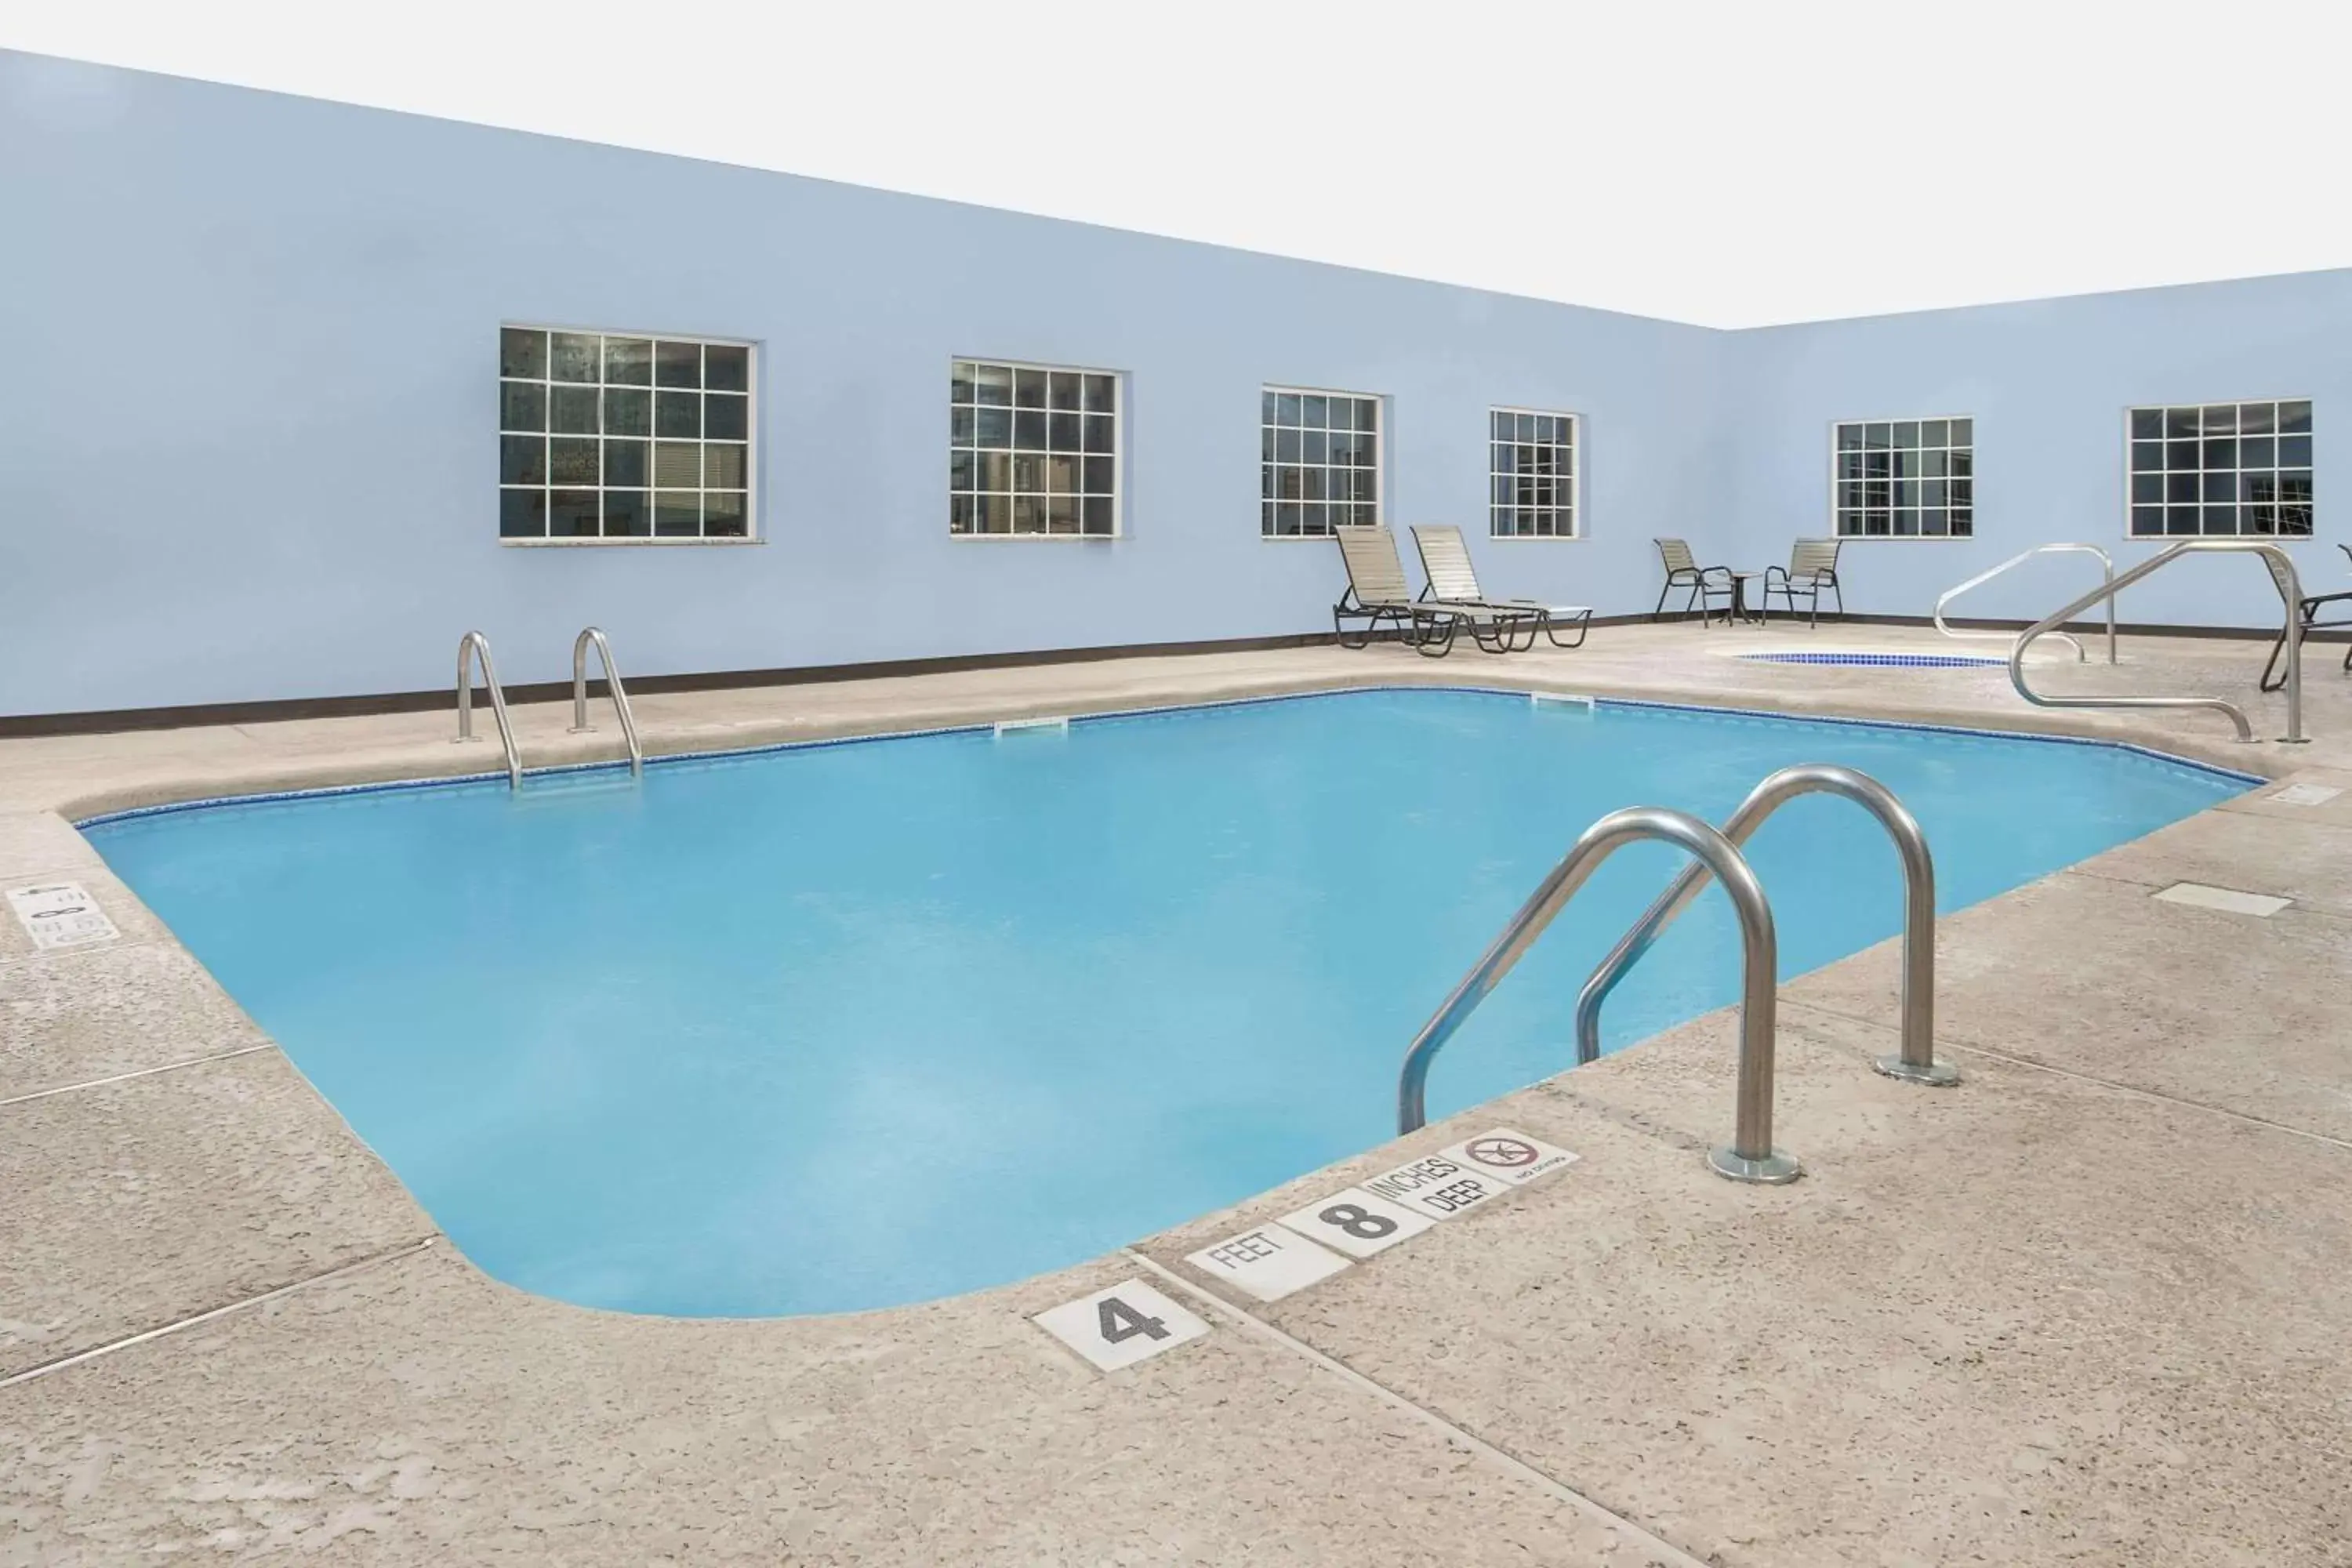 On site, Swimming Pool in Microtel Inn & Suites Mansfield PA